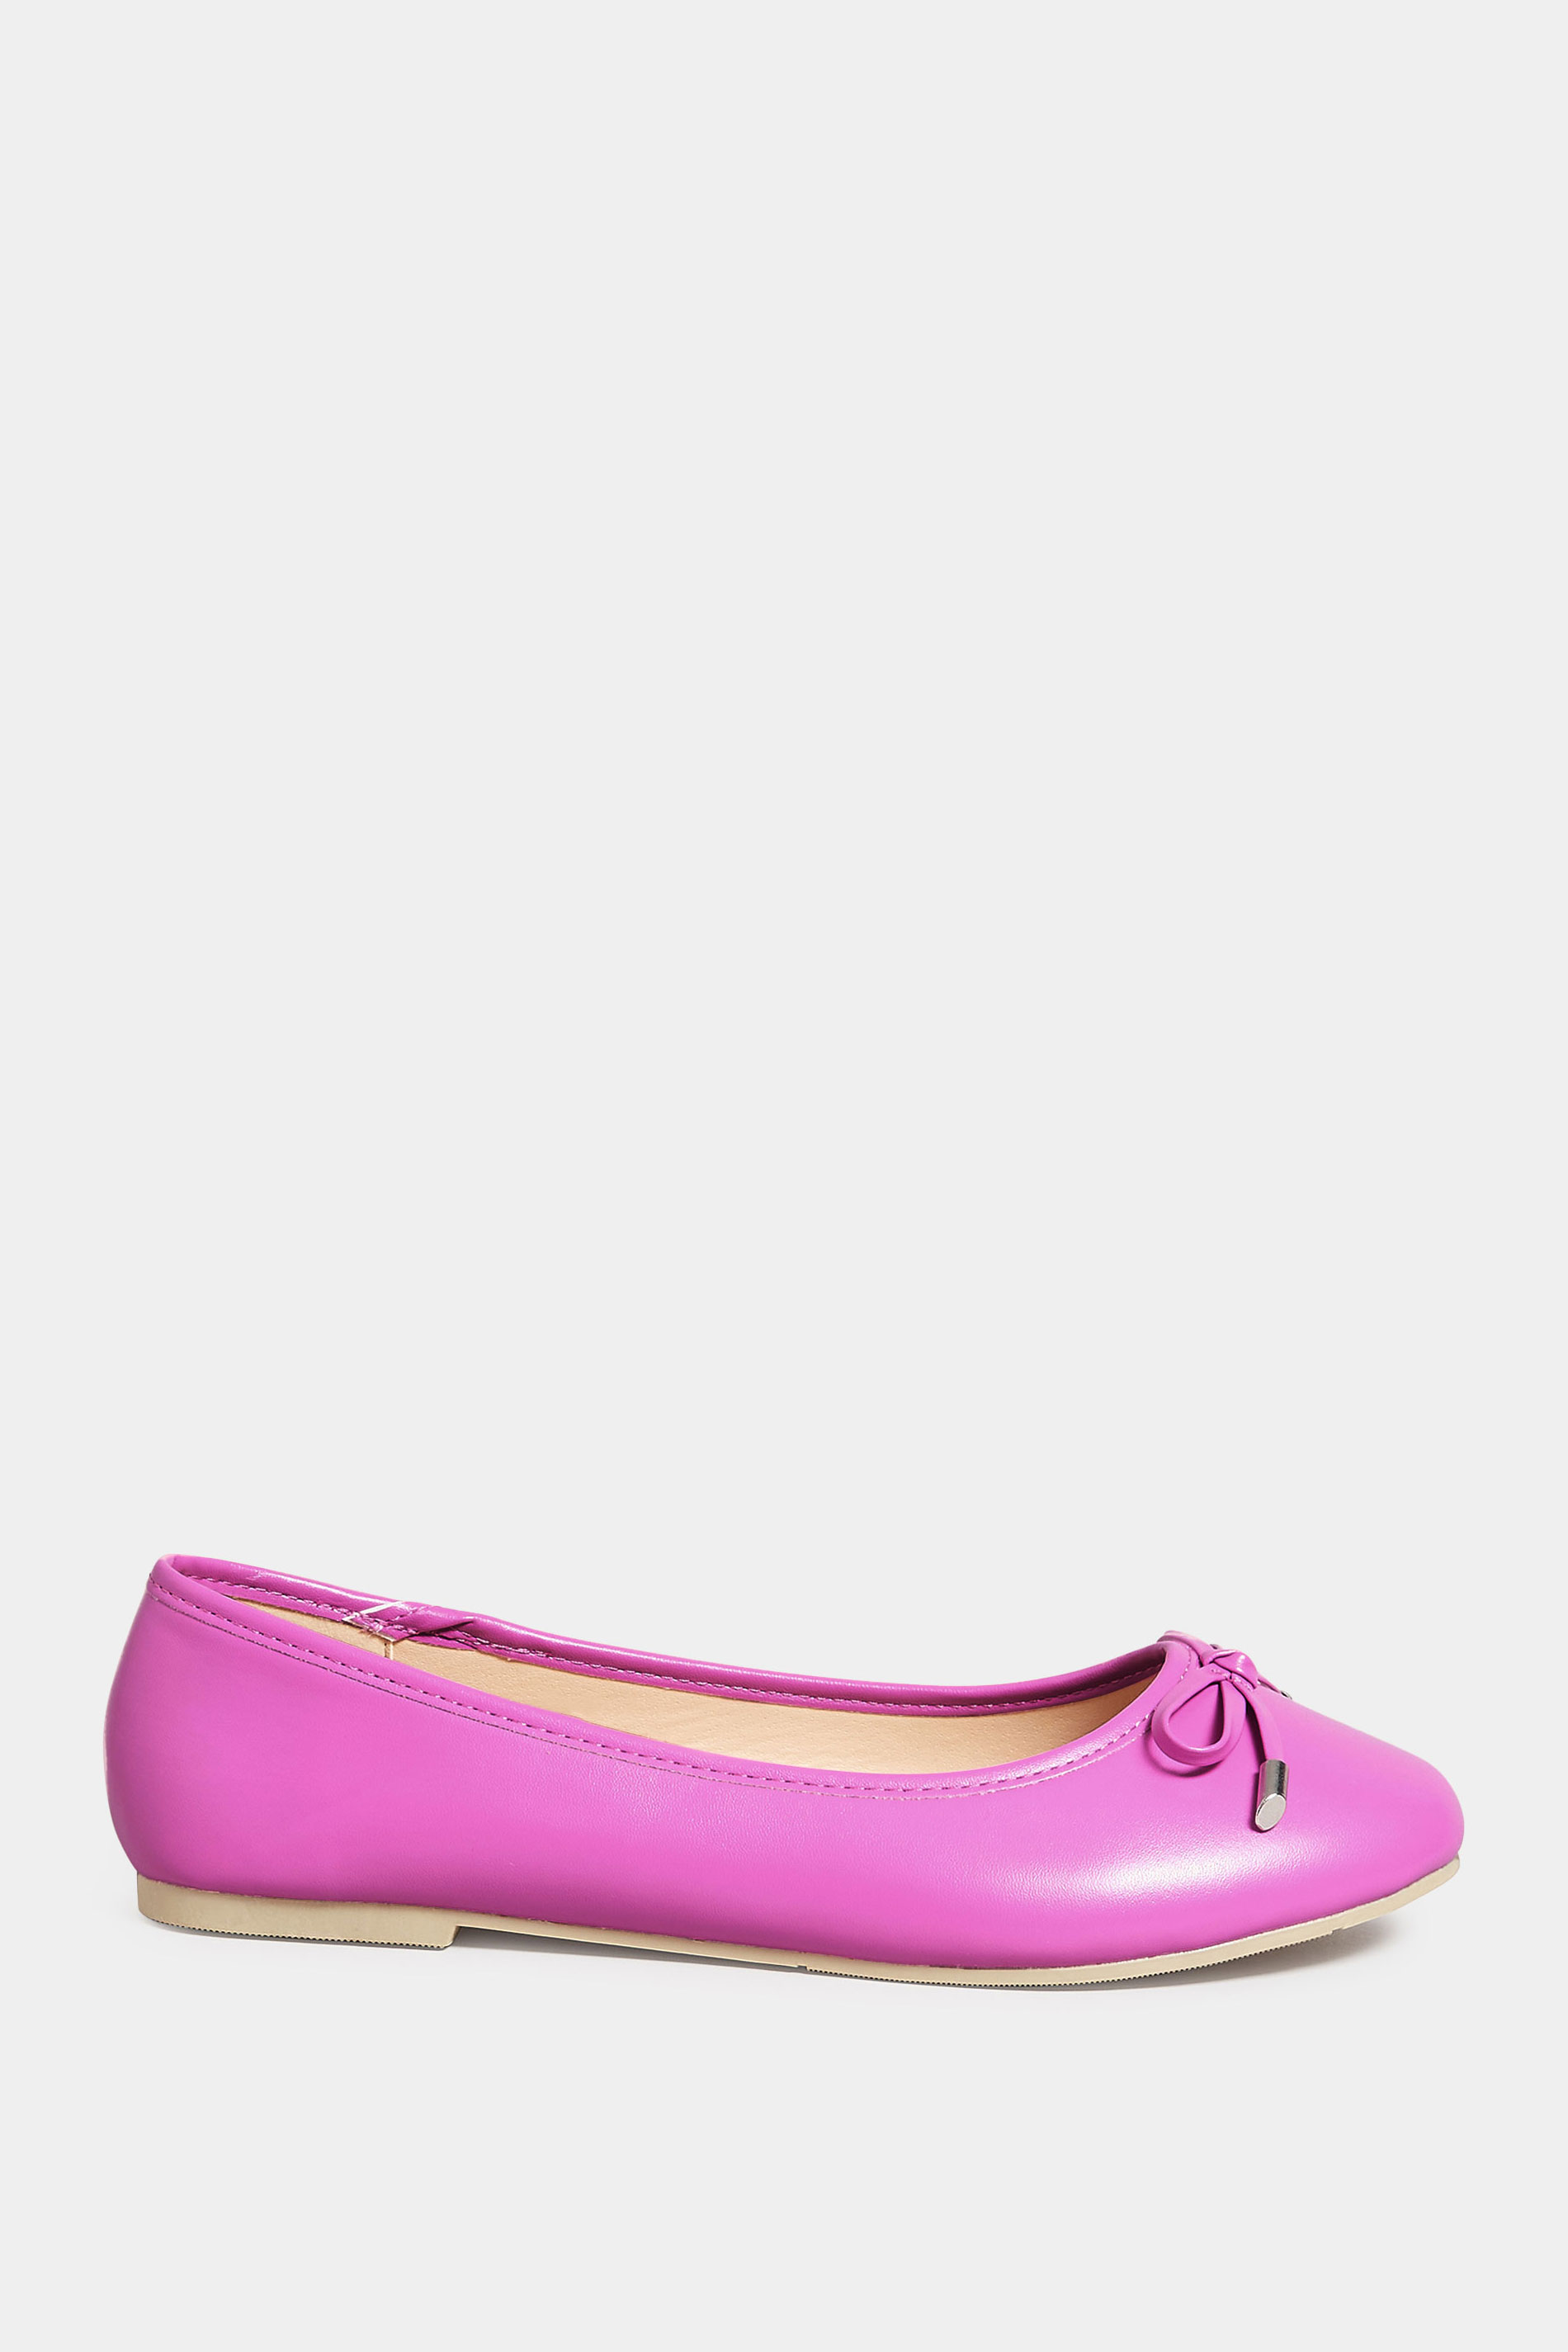 Pink Ballerina Pumps In Wide E Fit & Extra Wide EEE Fit | Yours Clothing 3